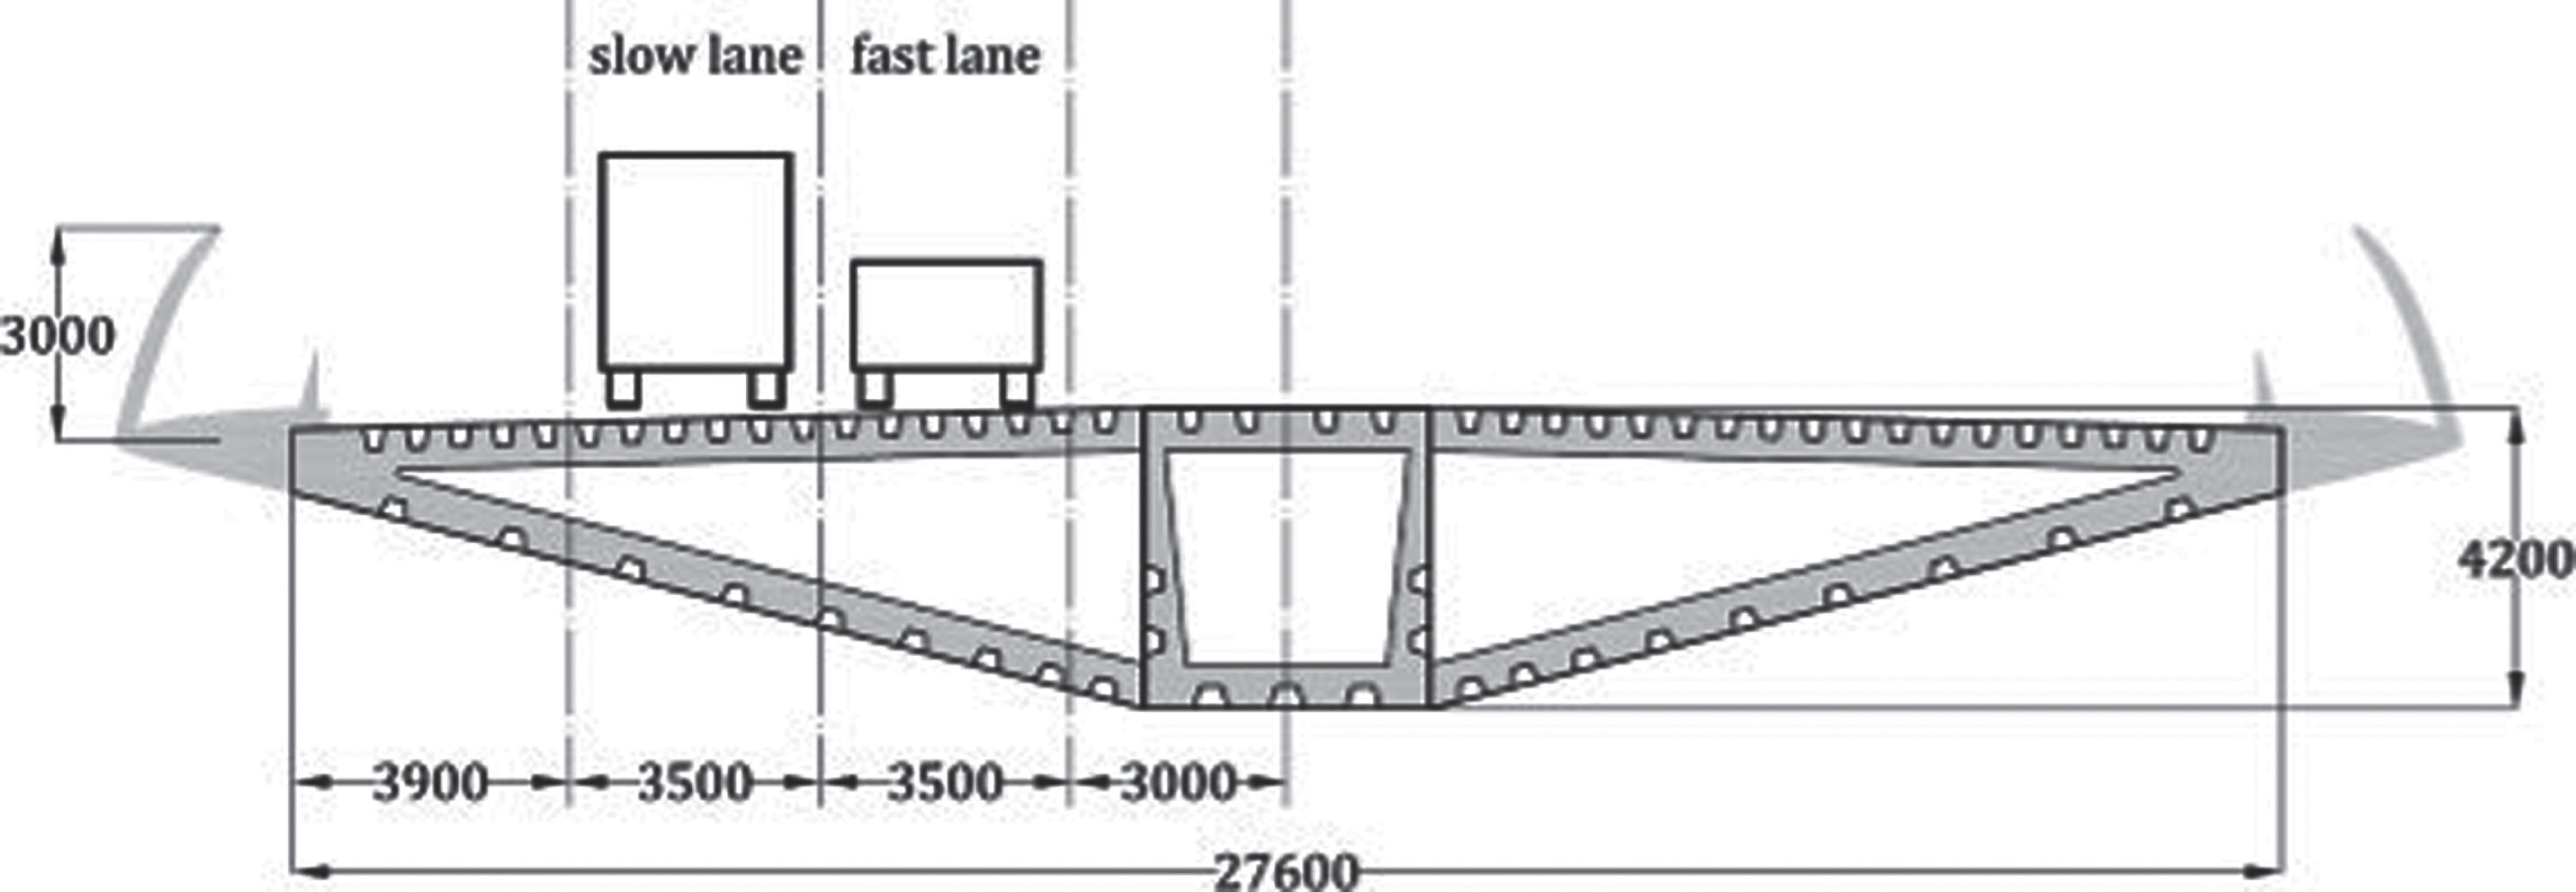 Cross section of the deck and traffic lanes.